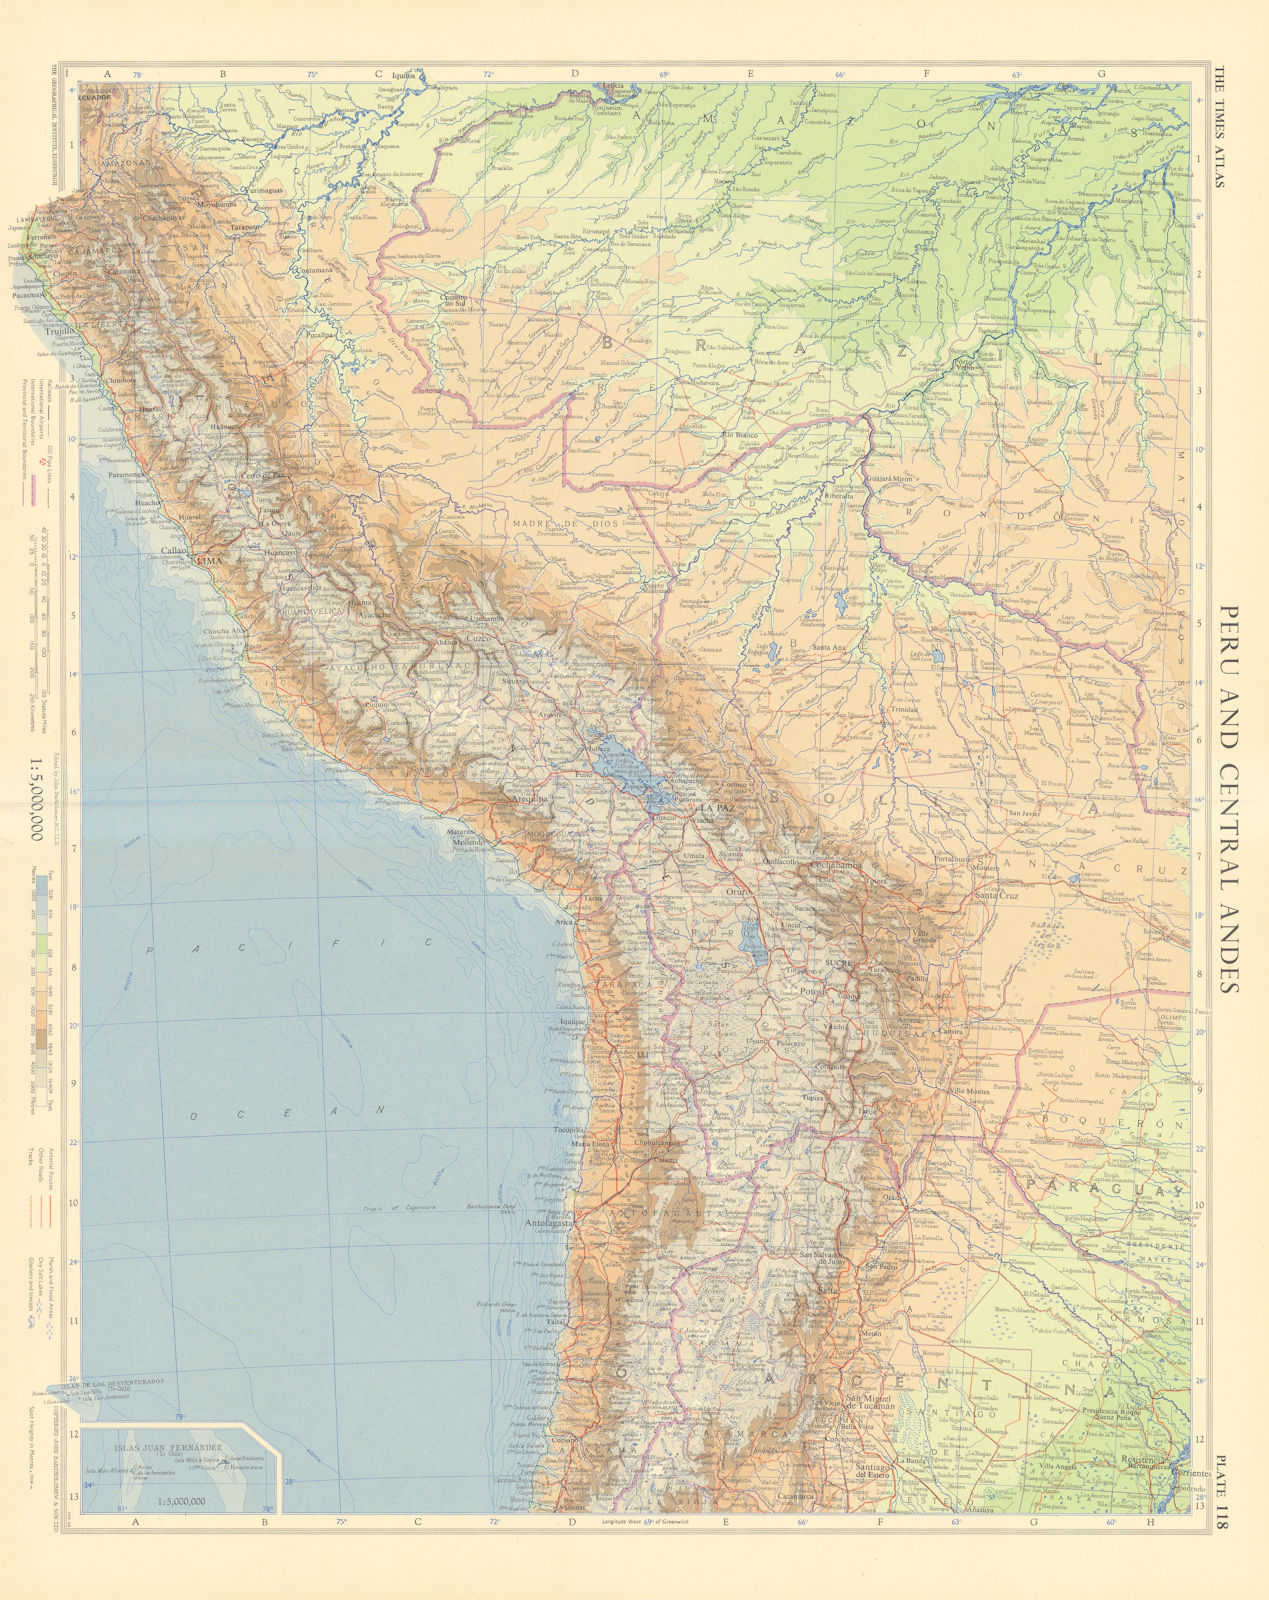 Associate Product Peru & central Andes. Bolivia Chile Amazonai. Andean States. TIMES 1957 map